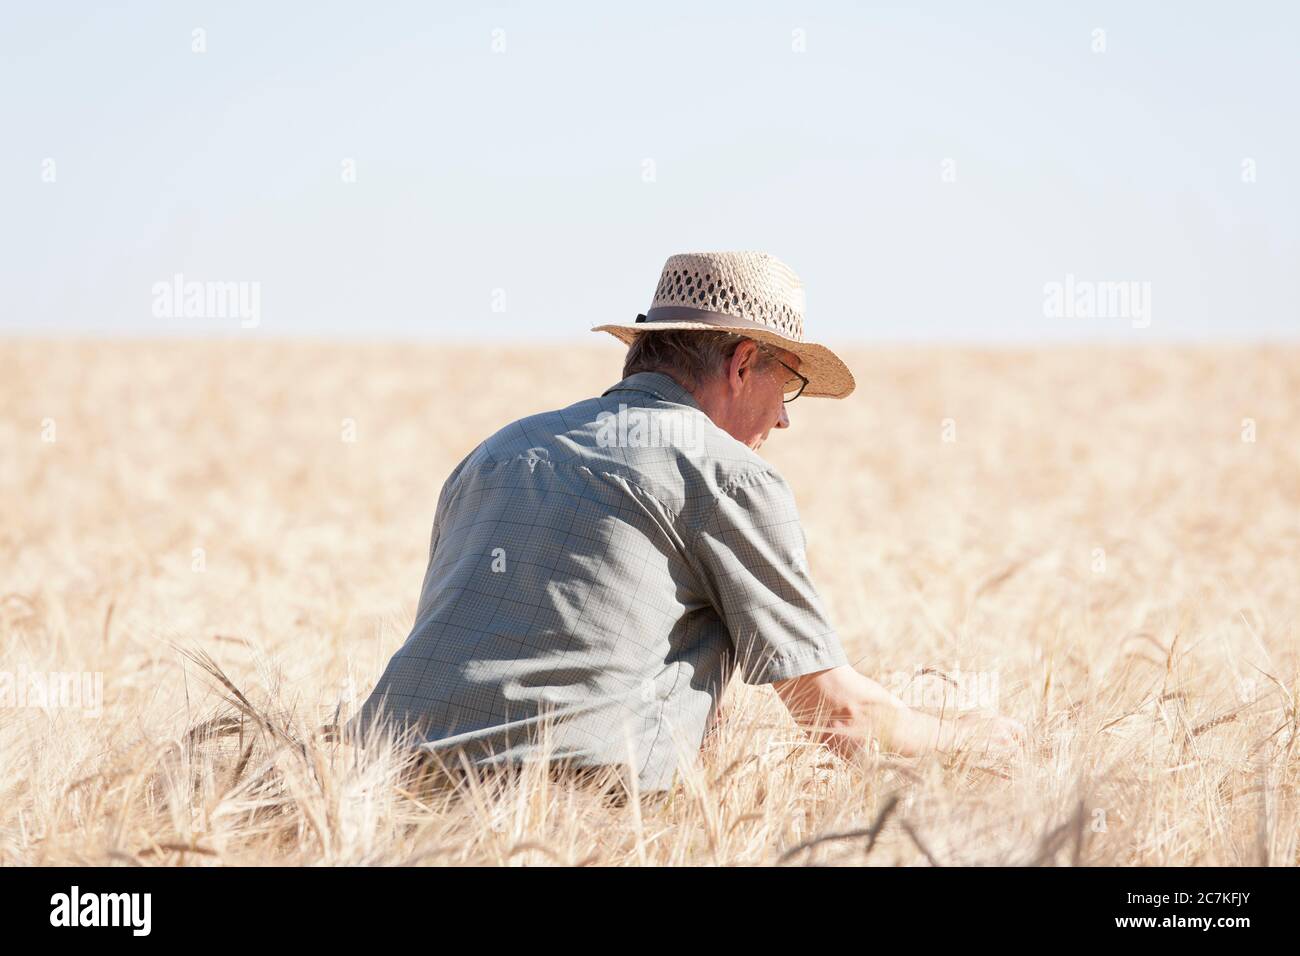 Mature farmer on his knees examining dried up field of crop on hot day as a result of the global warming - focus on the man Stock Photo